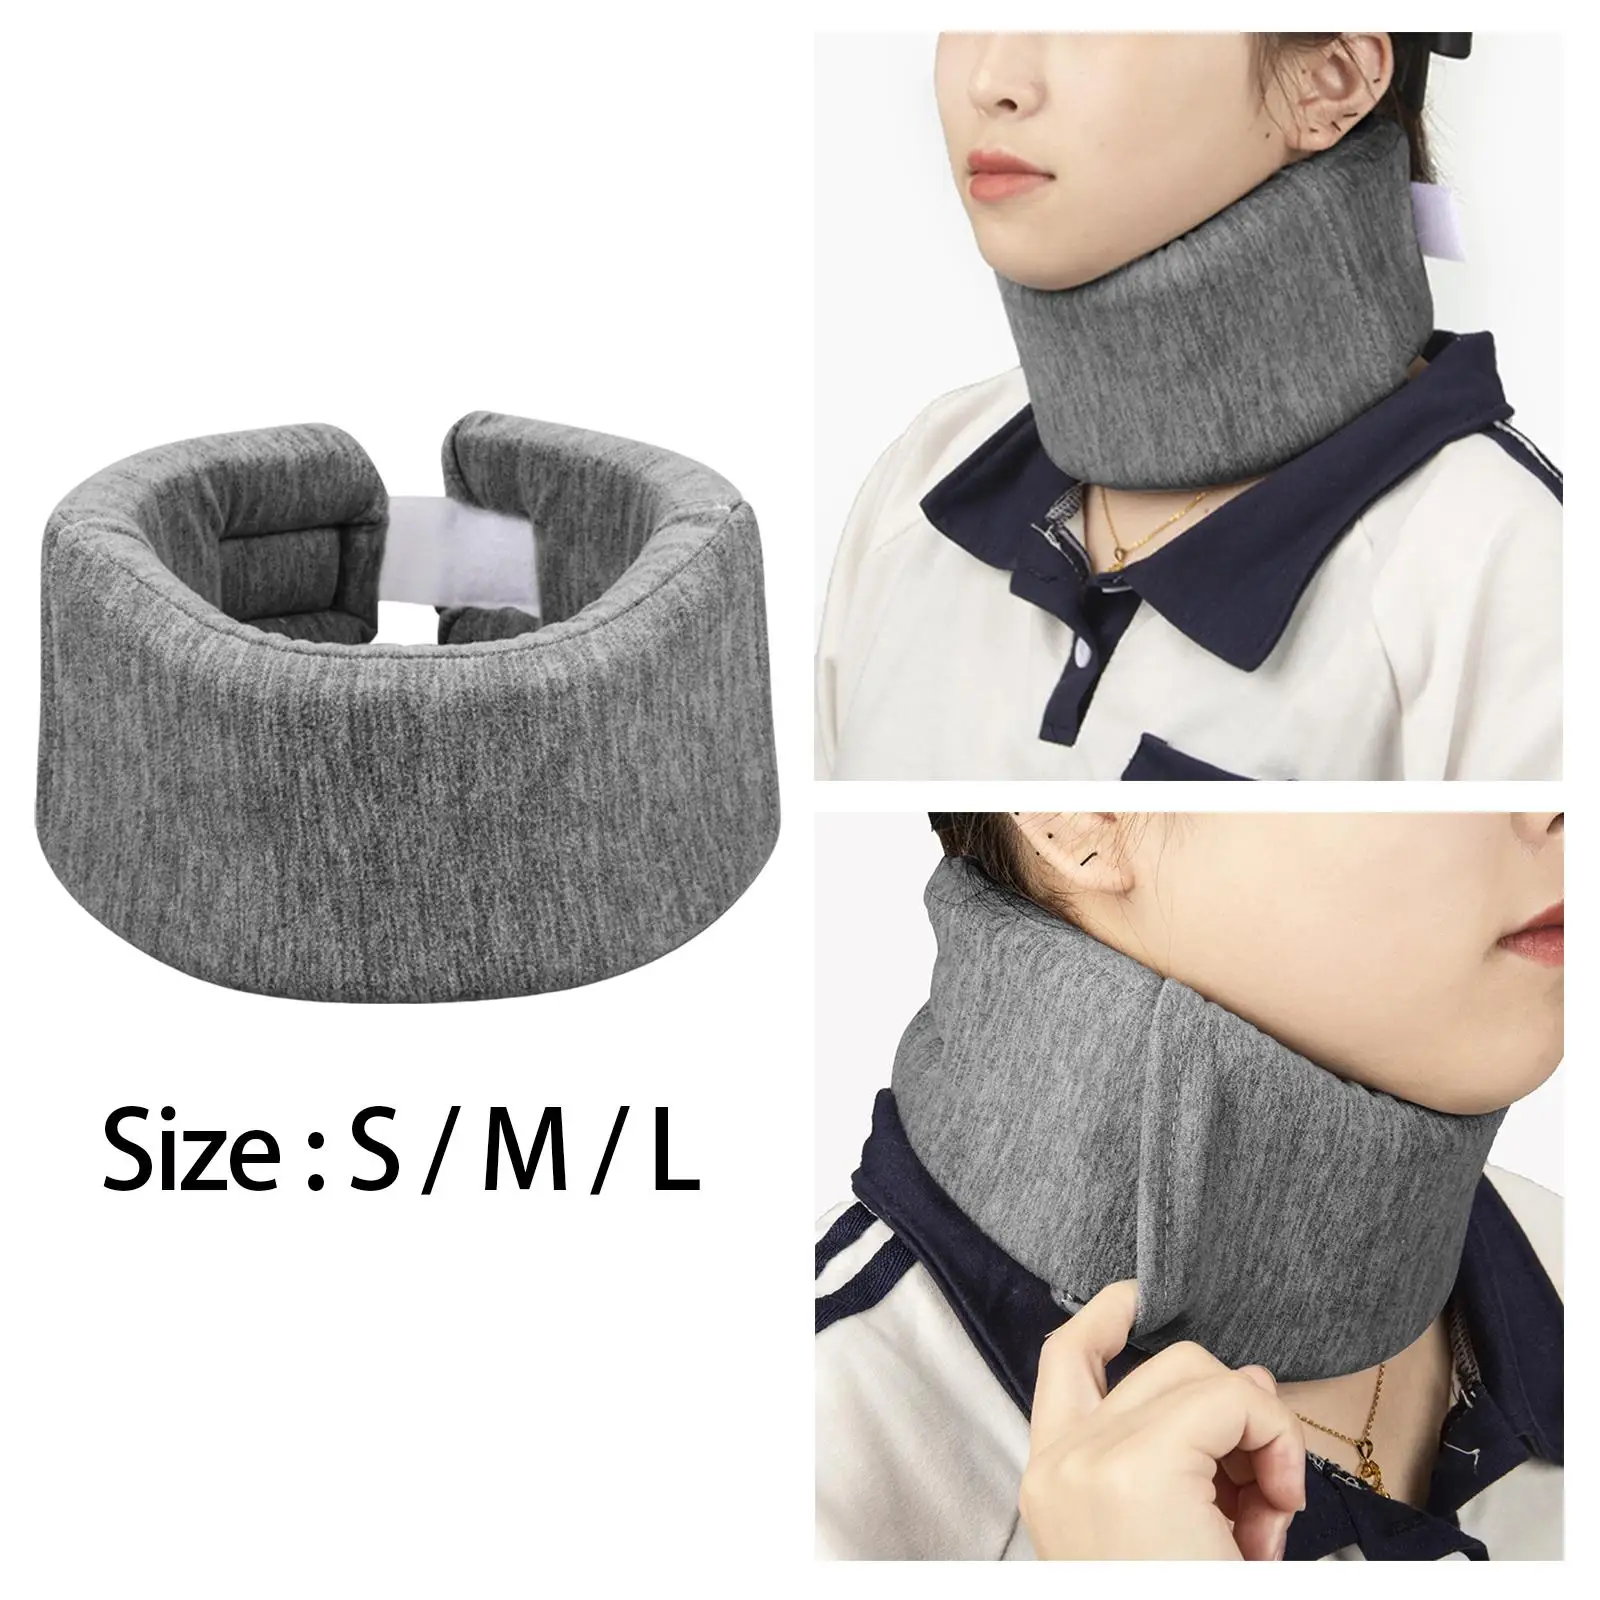 Travel Pillow Breathable Soft Comfortable Head Neck Support Easy to Use Neck Pillow for Home Rest Use Plane Office Airplane Car